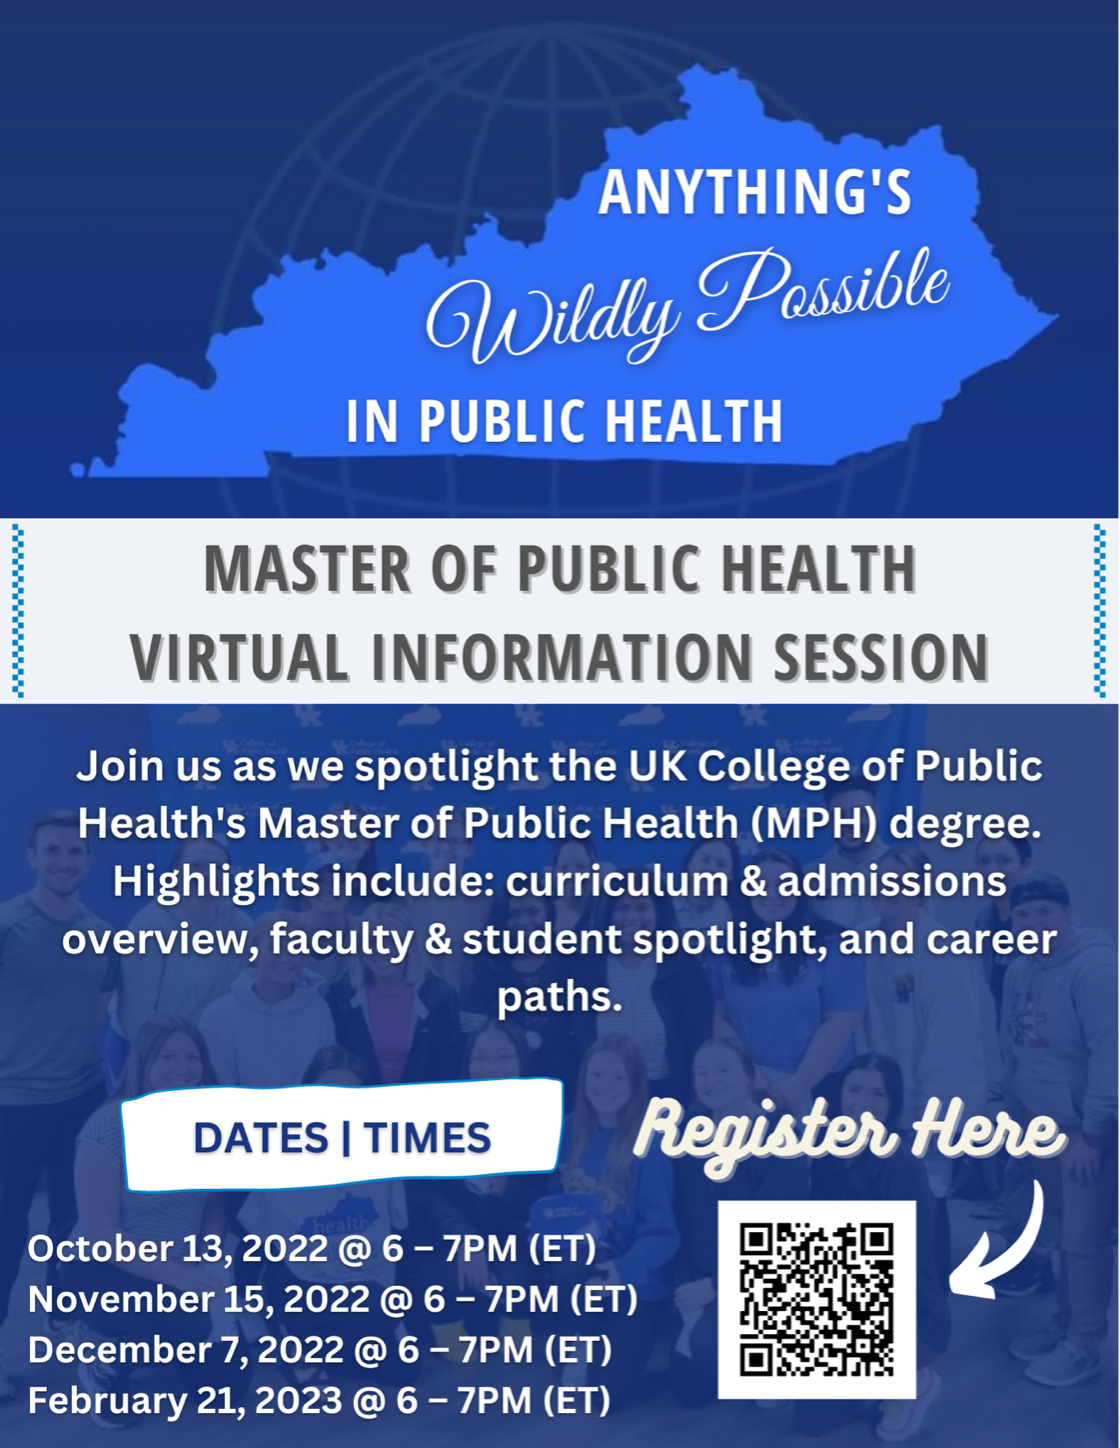 an illustrated flyer for the "Anything's Possible in Public Health" event